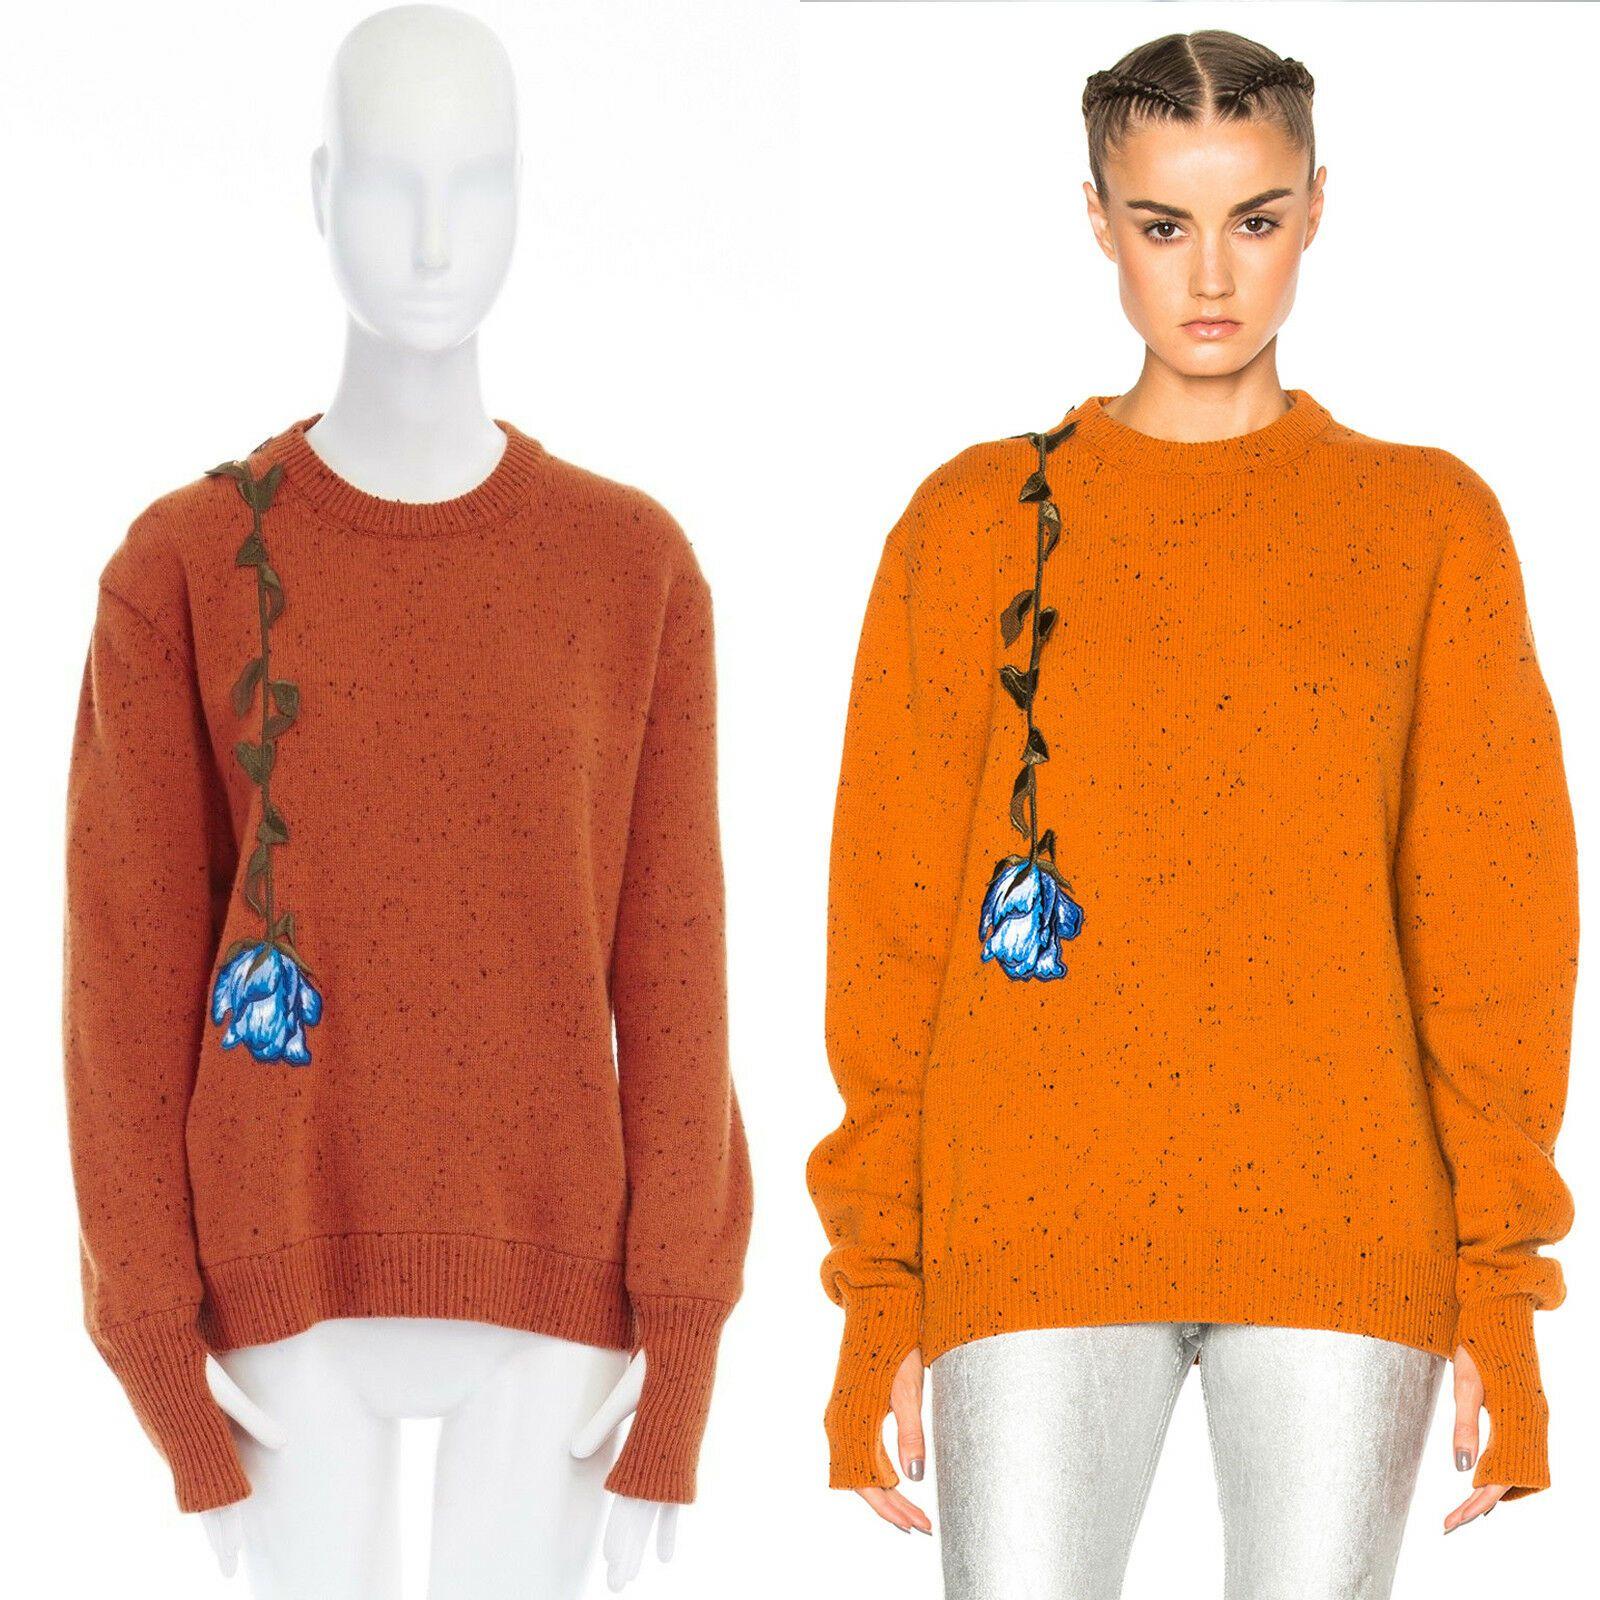 CHRISTOPHER KANE orange speckle virgin wool flower embroidered sweater top S
CHRISTOPHER KANE
Virgin wool. Orange with black speckle knit. 
Crew ribbed neck. Flower embroidery patched at front. 
Long sleeve. Thumb hole at cuff. 
Made in